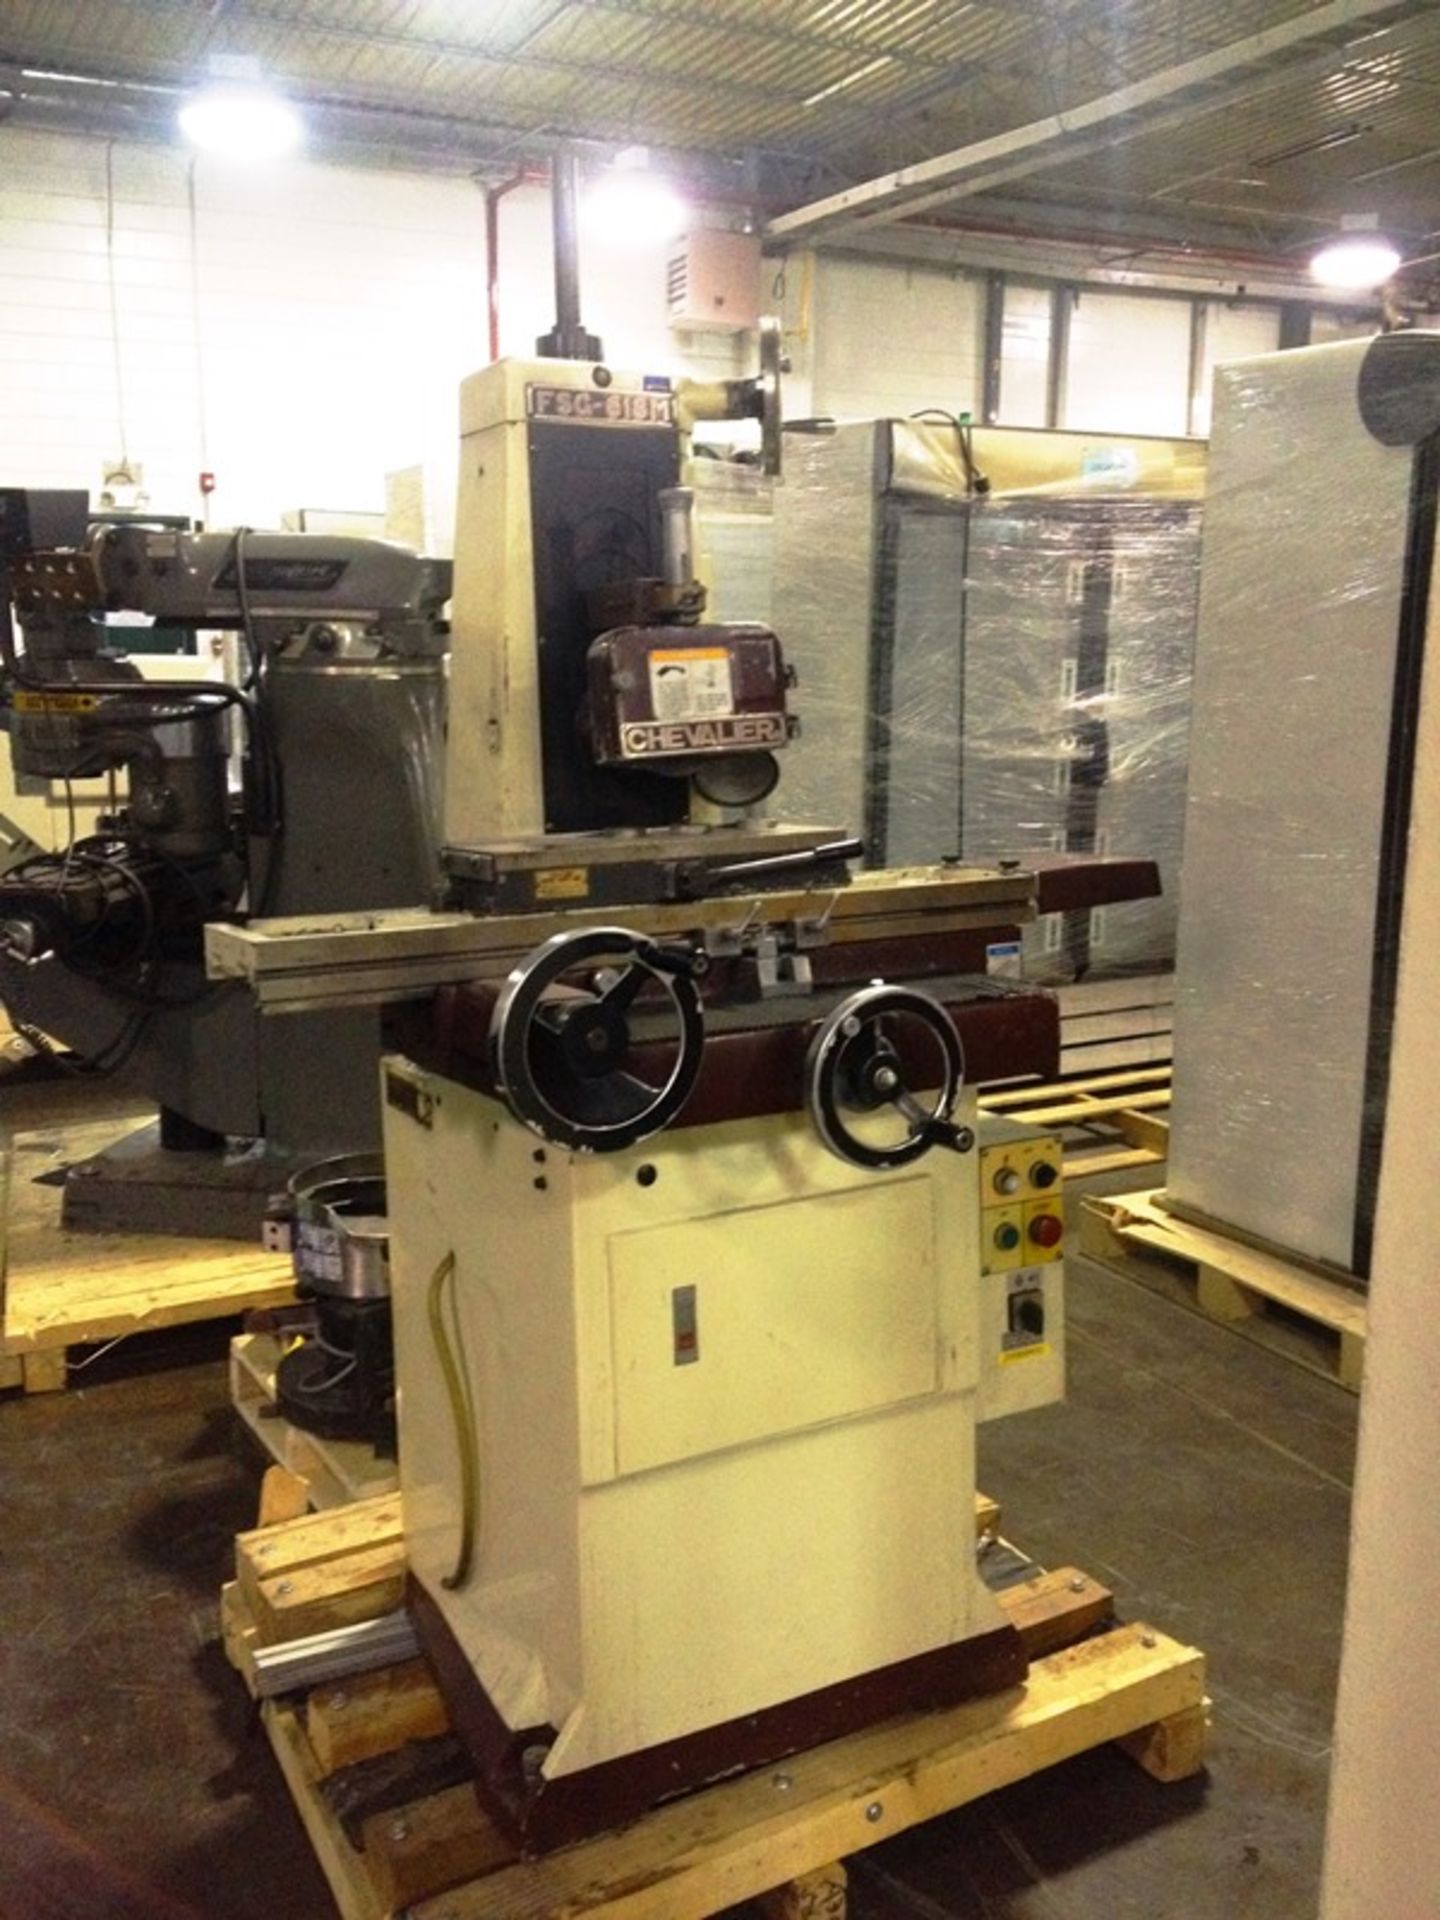 Surface Grinder, Brand: Chevalier, Model: FSG-6184, Series: A3841021. Condition: Good, Location: Cd. - Image 7 of 13